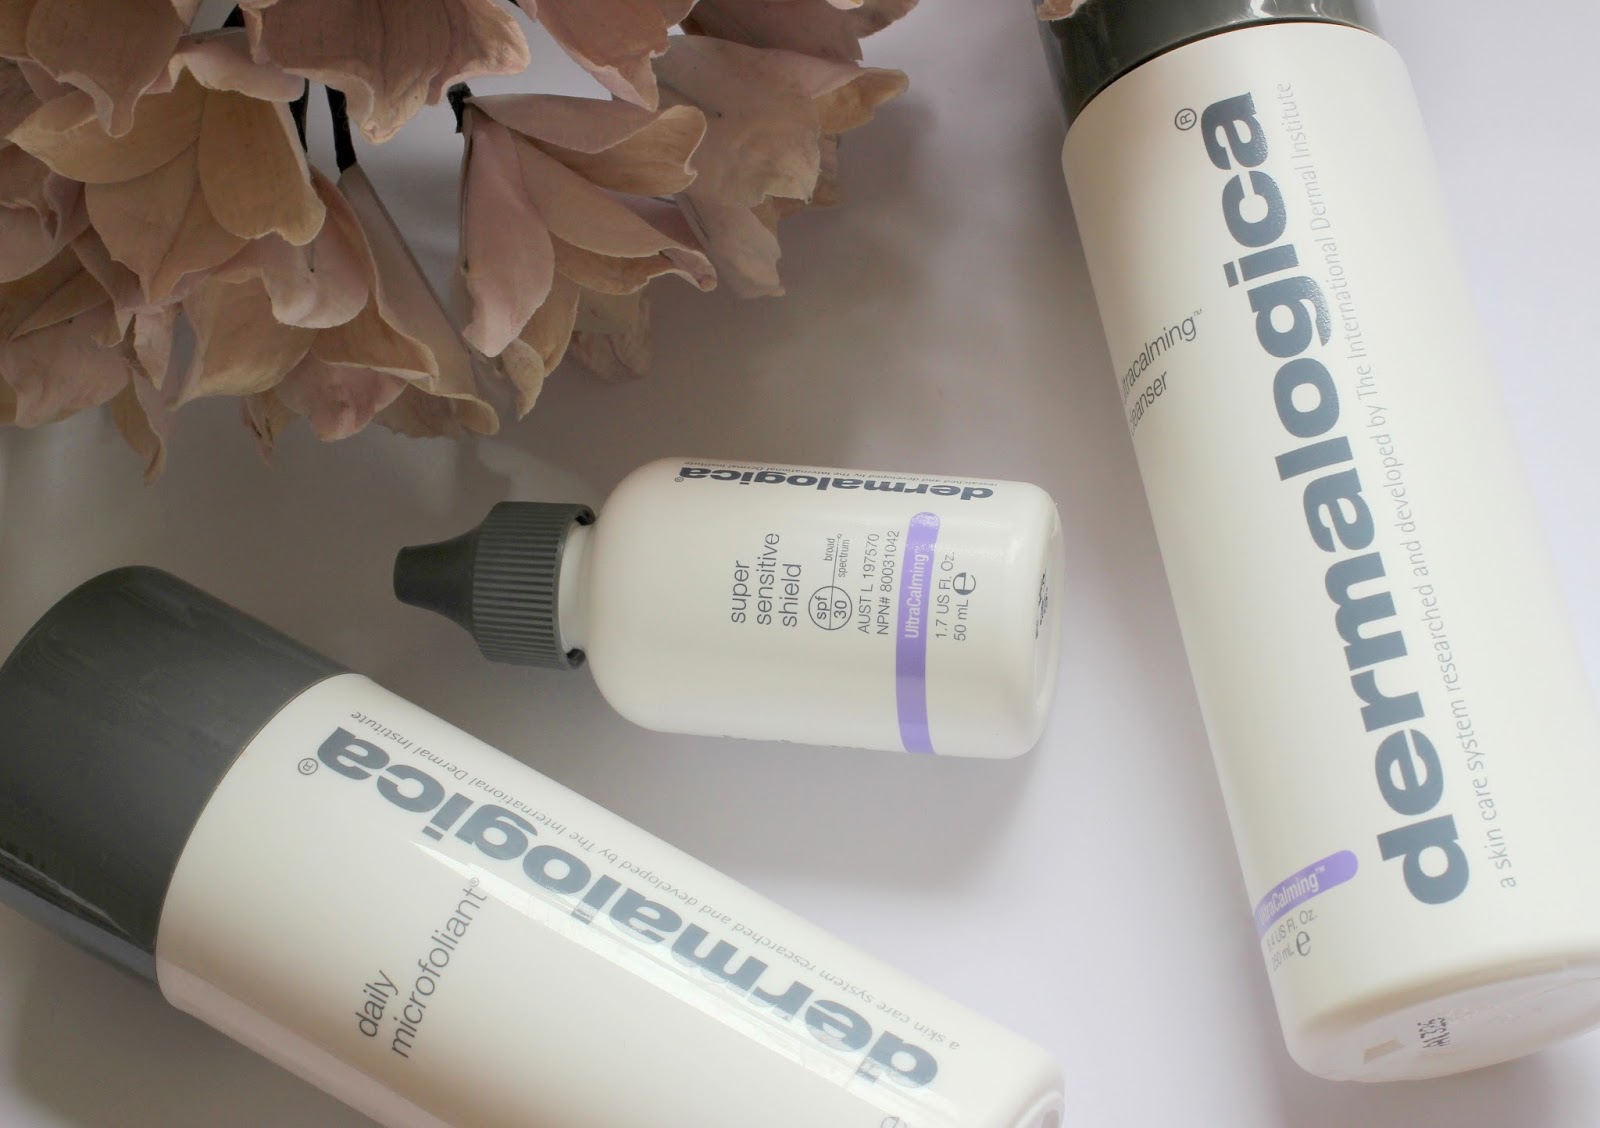 Dermalogica competition